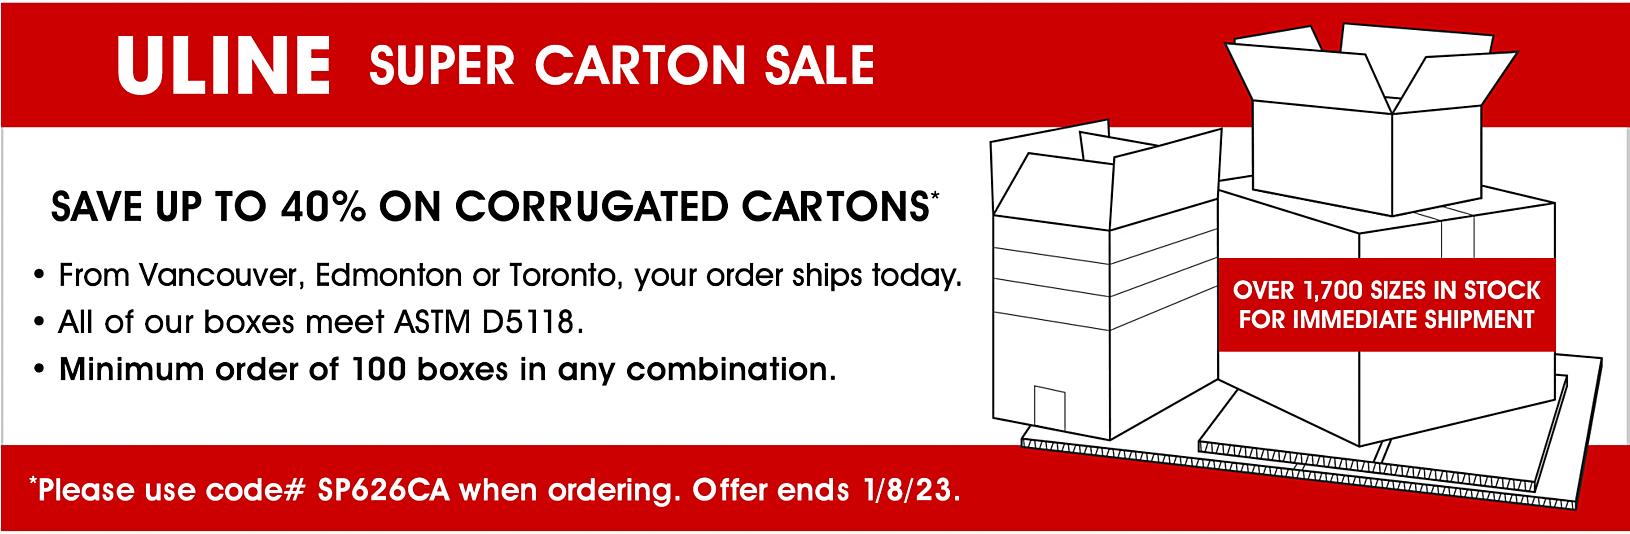 Super Carton Sale - Save up to 40% on Corrugated Cartons. Please use code# SP626CA when ordering. Offer ends 1/8/23.